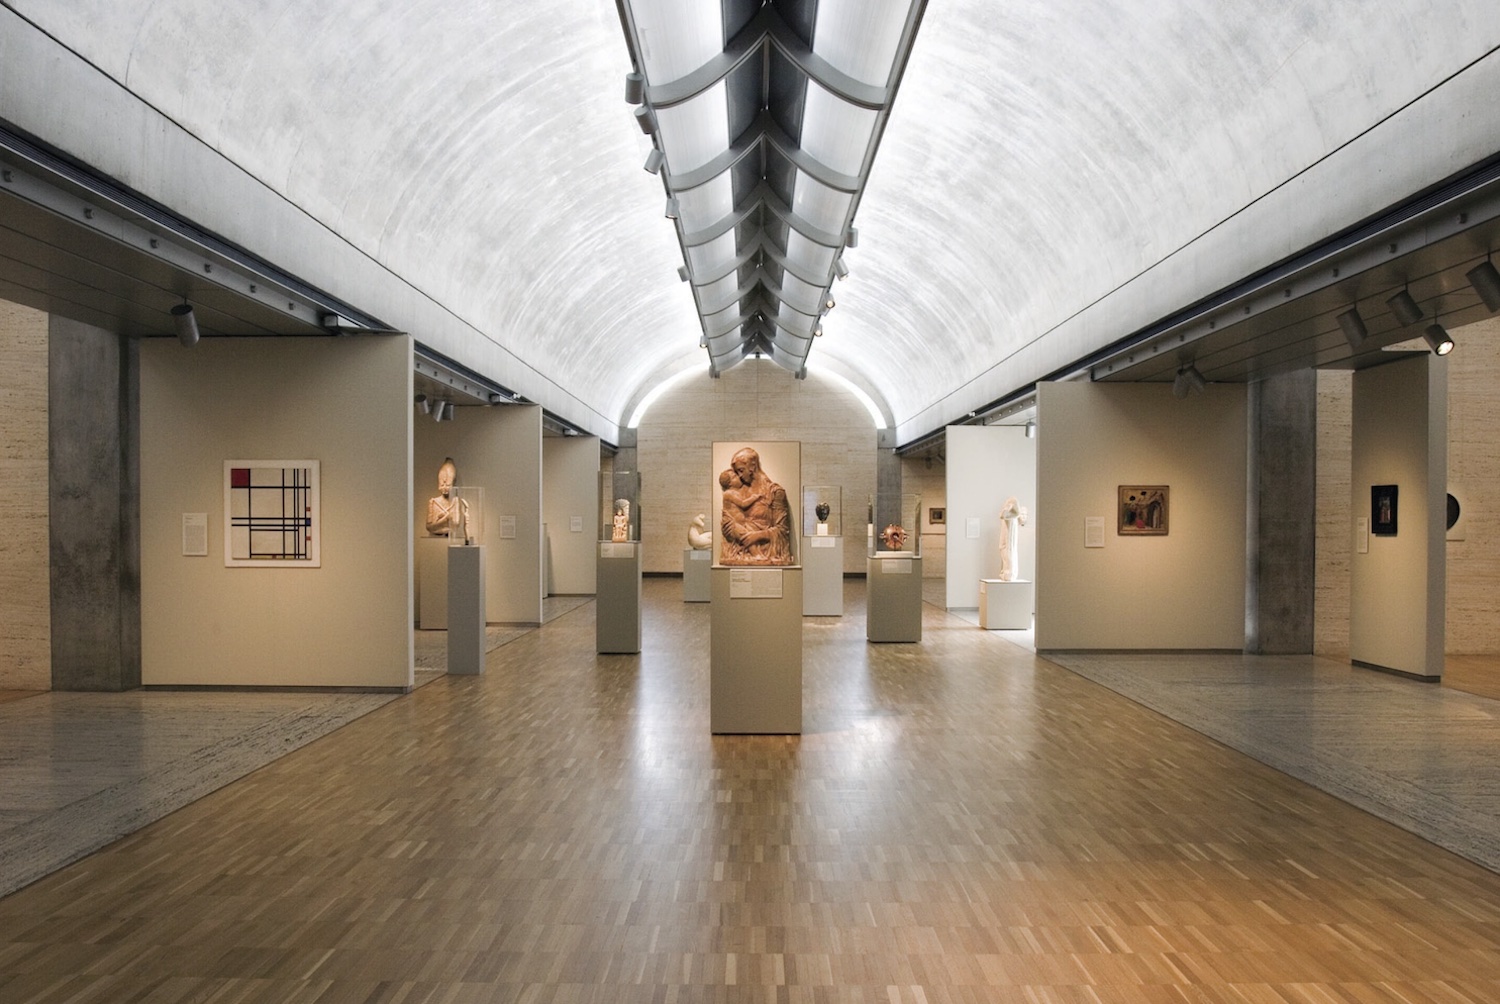 Interior of Kimbell Art Museum, with statues and posters on walls 